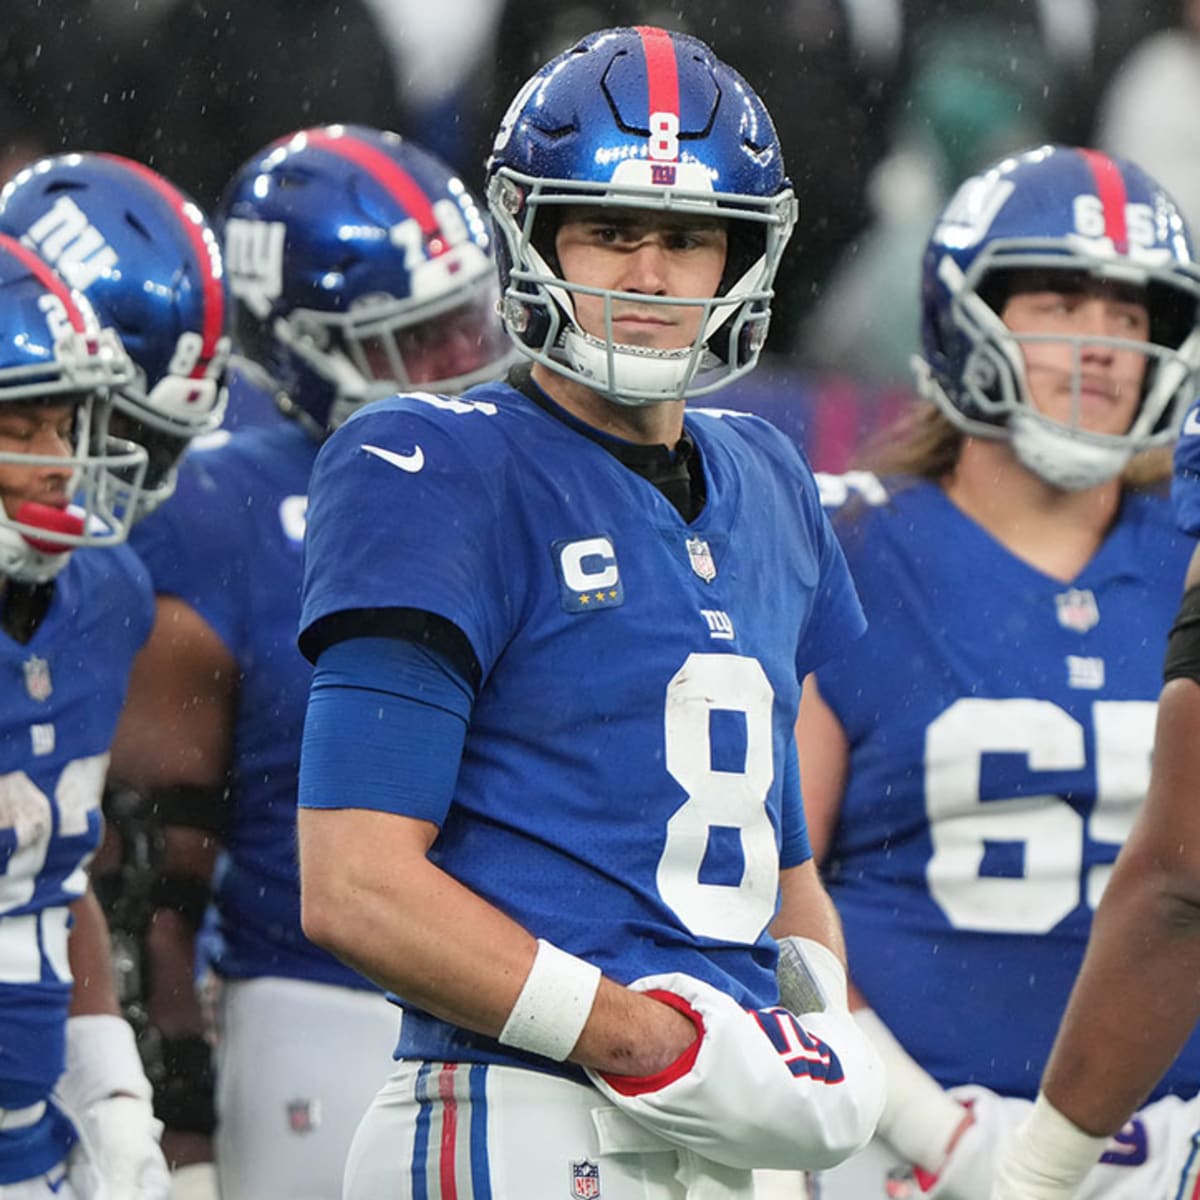 Giants vs. 49ers: Time, television, radio and streaming schedule